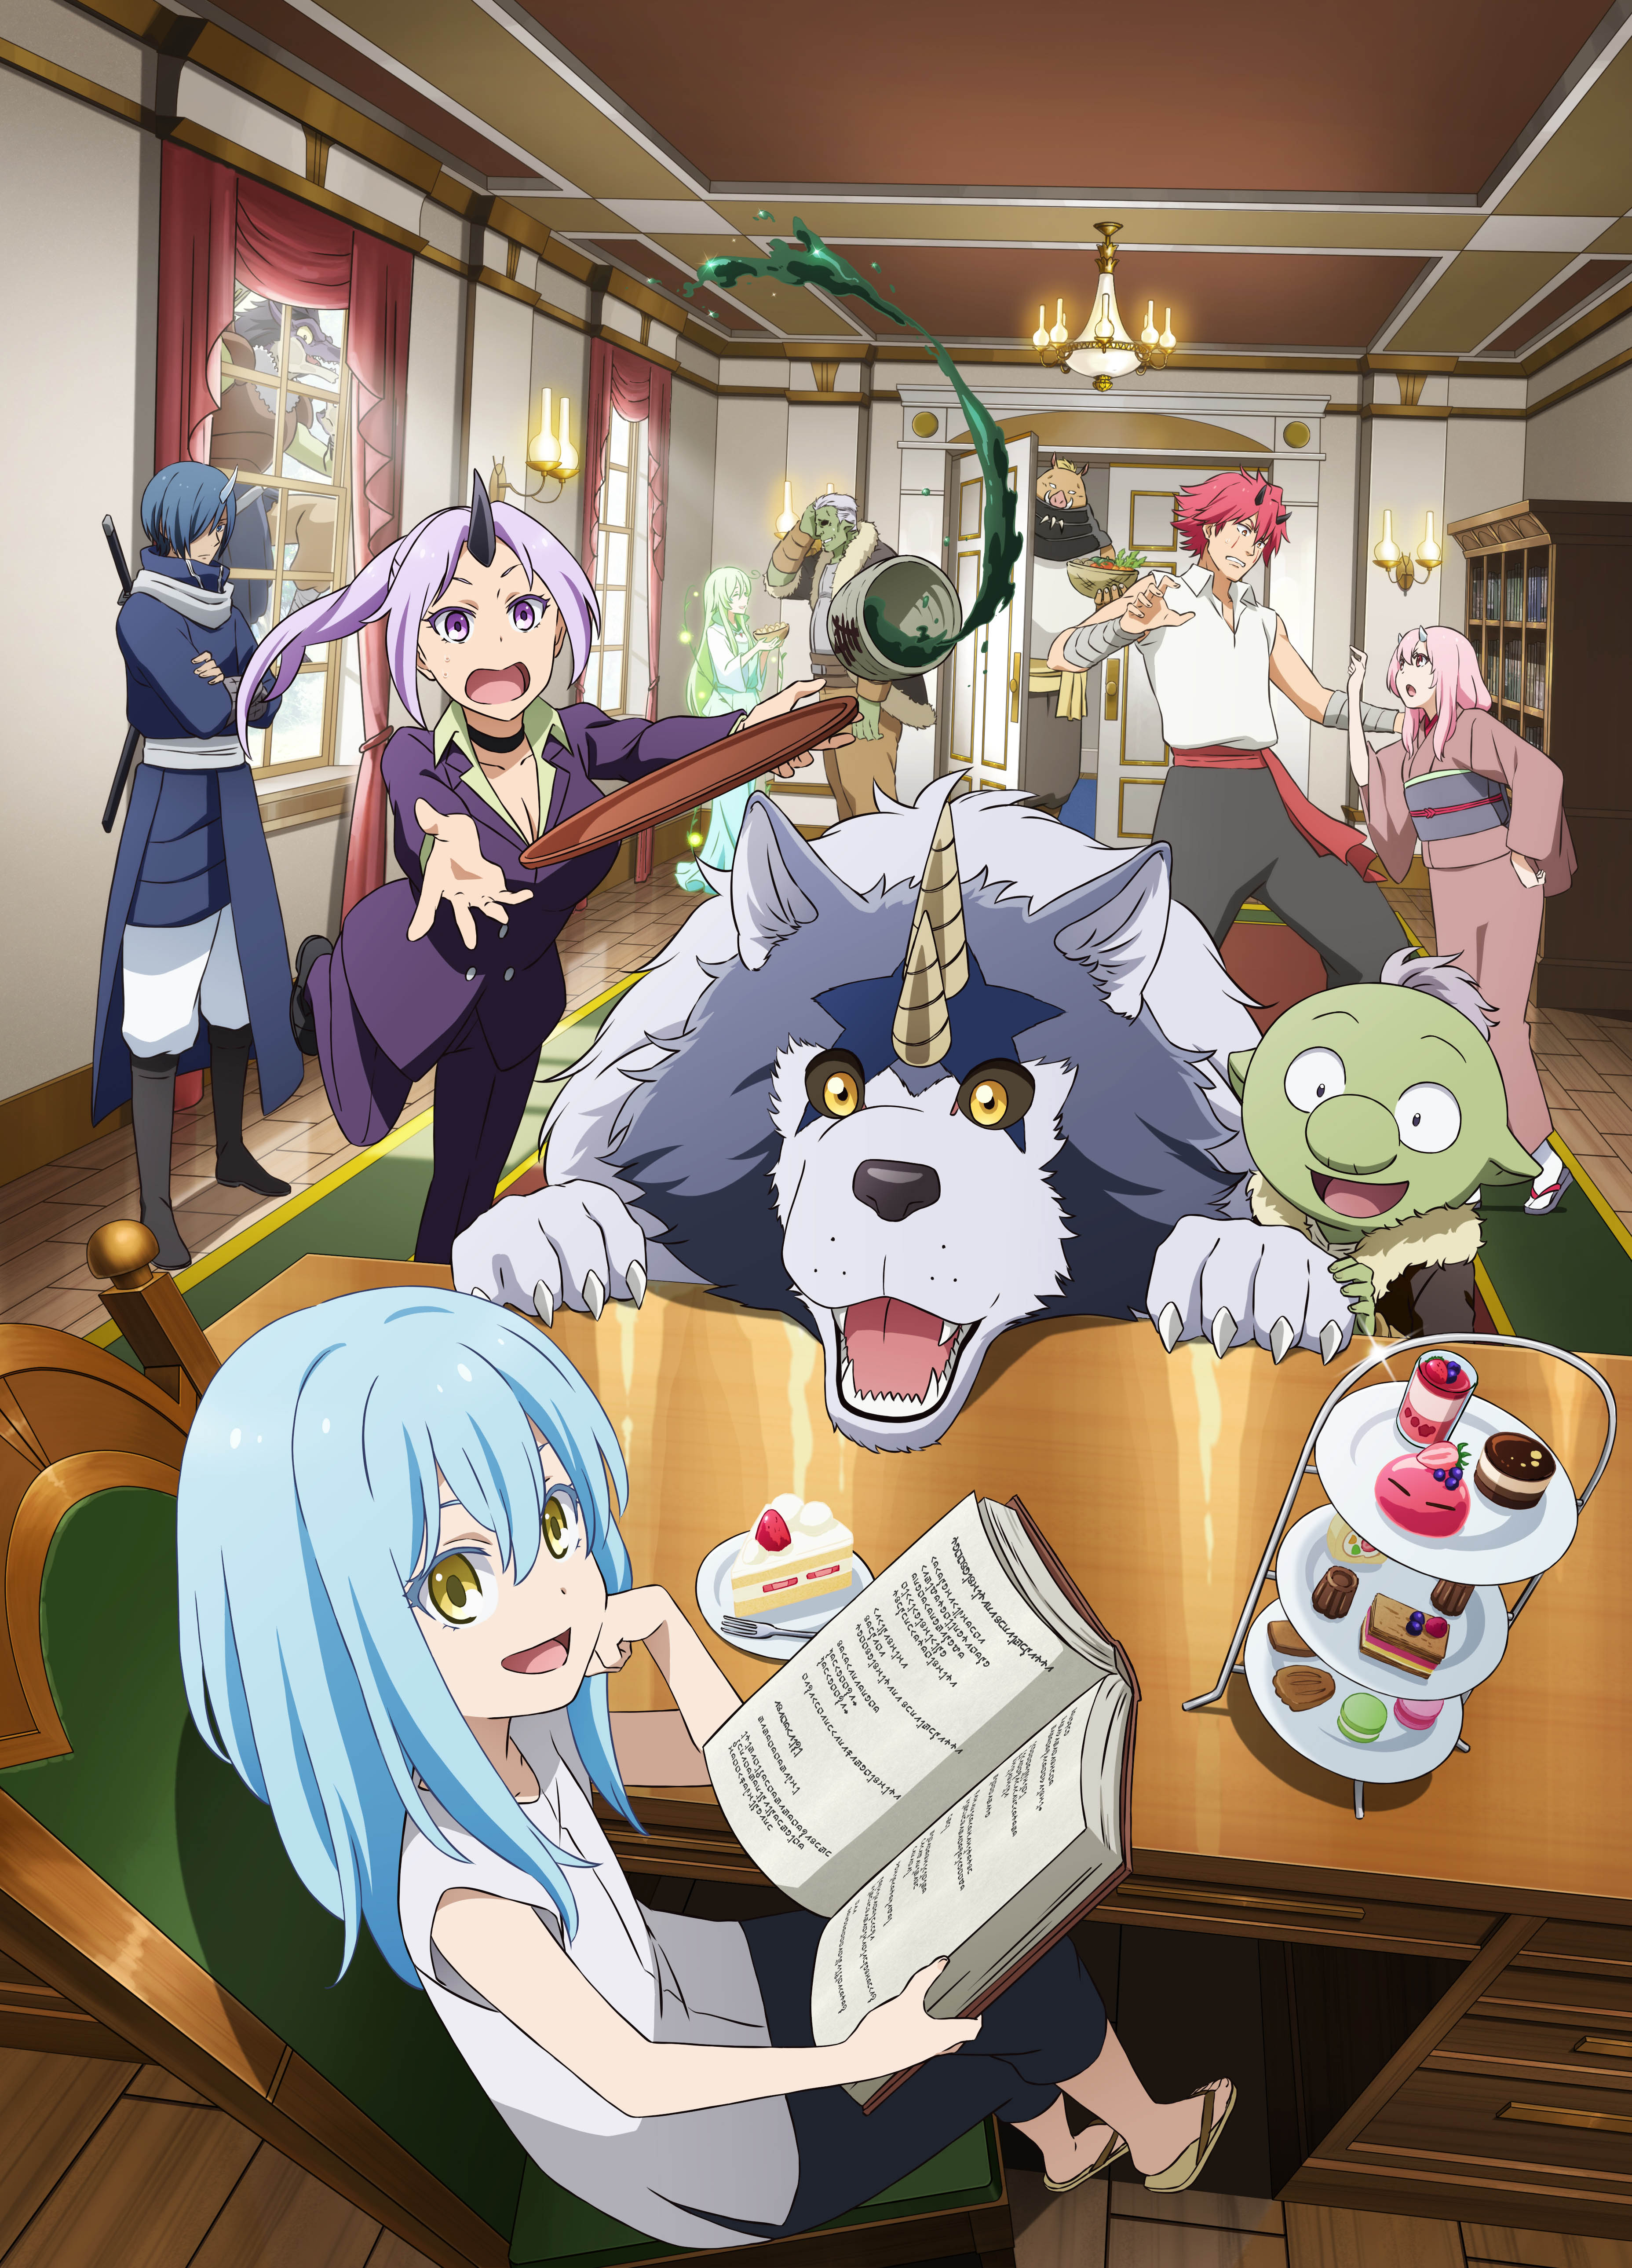 The Slime Diaries: That Time I Got Reincarnated as a Slime - The